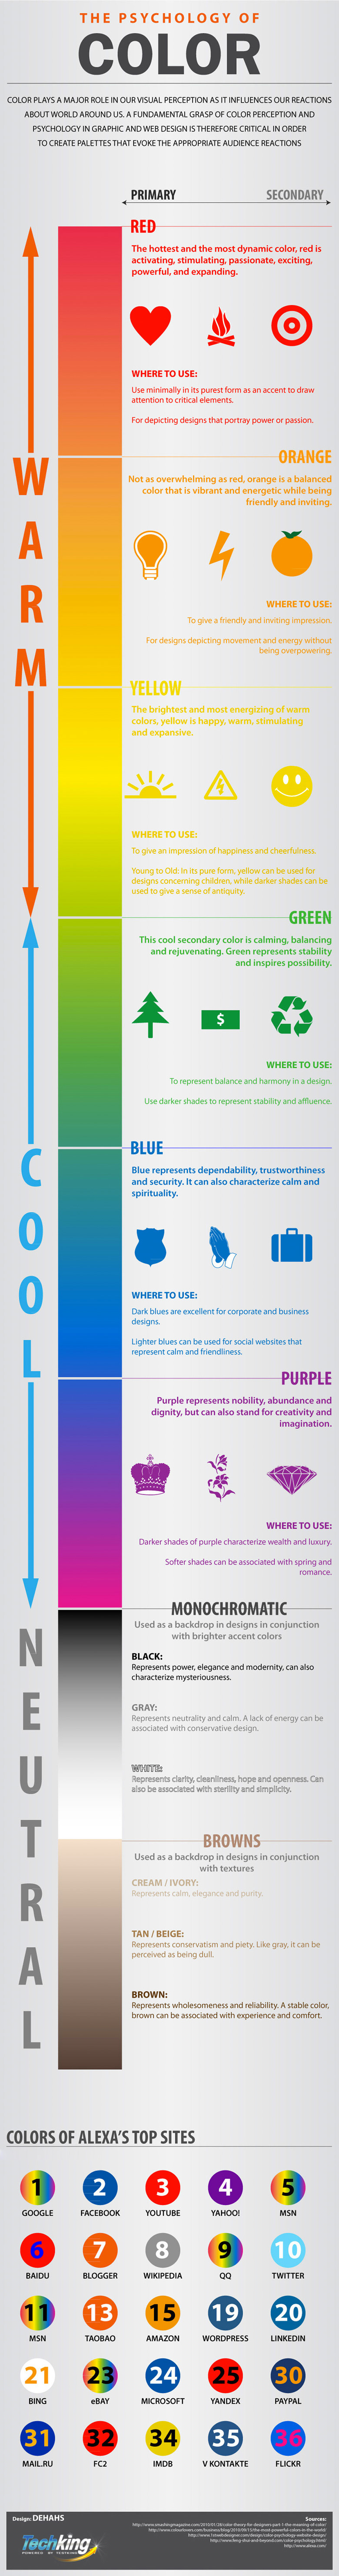 color-psychology-meanings-usage-infographic